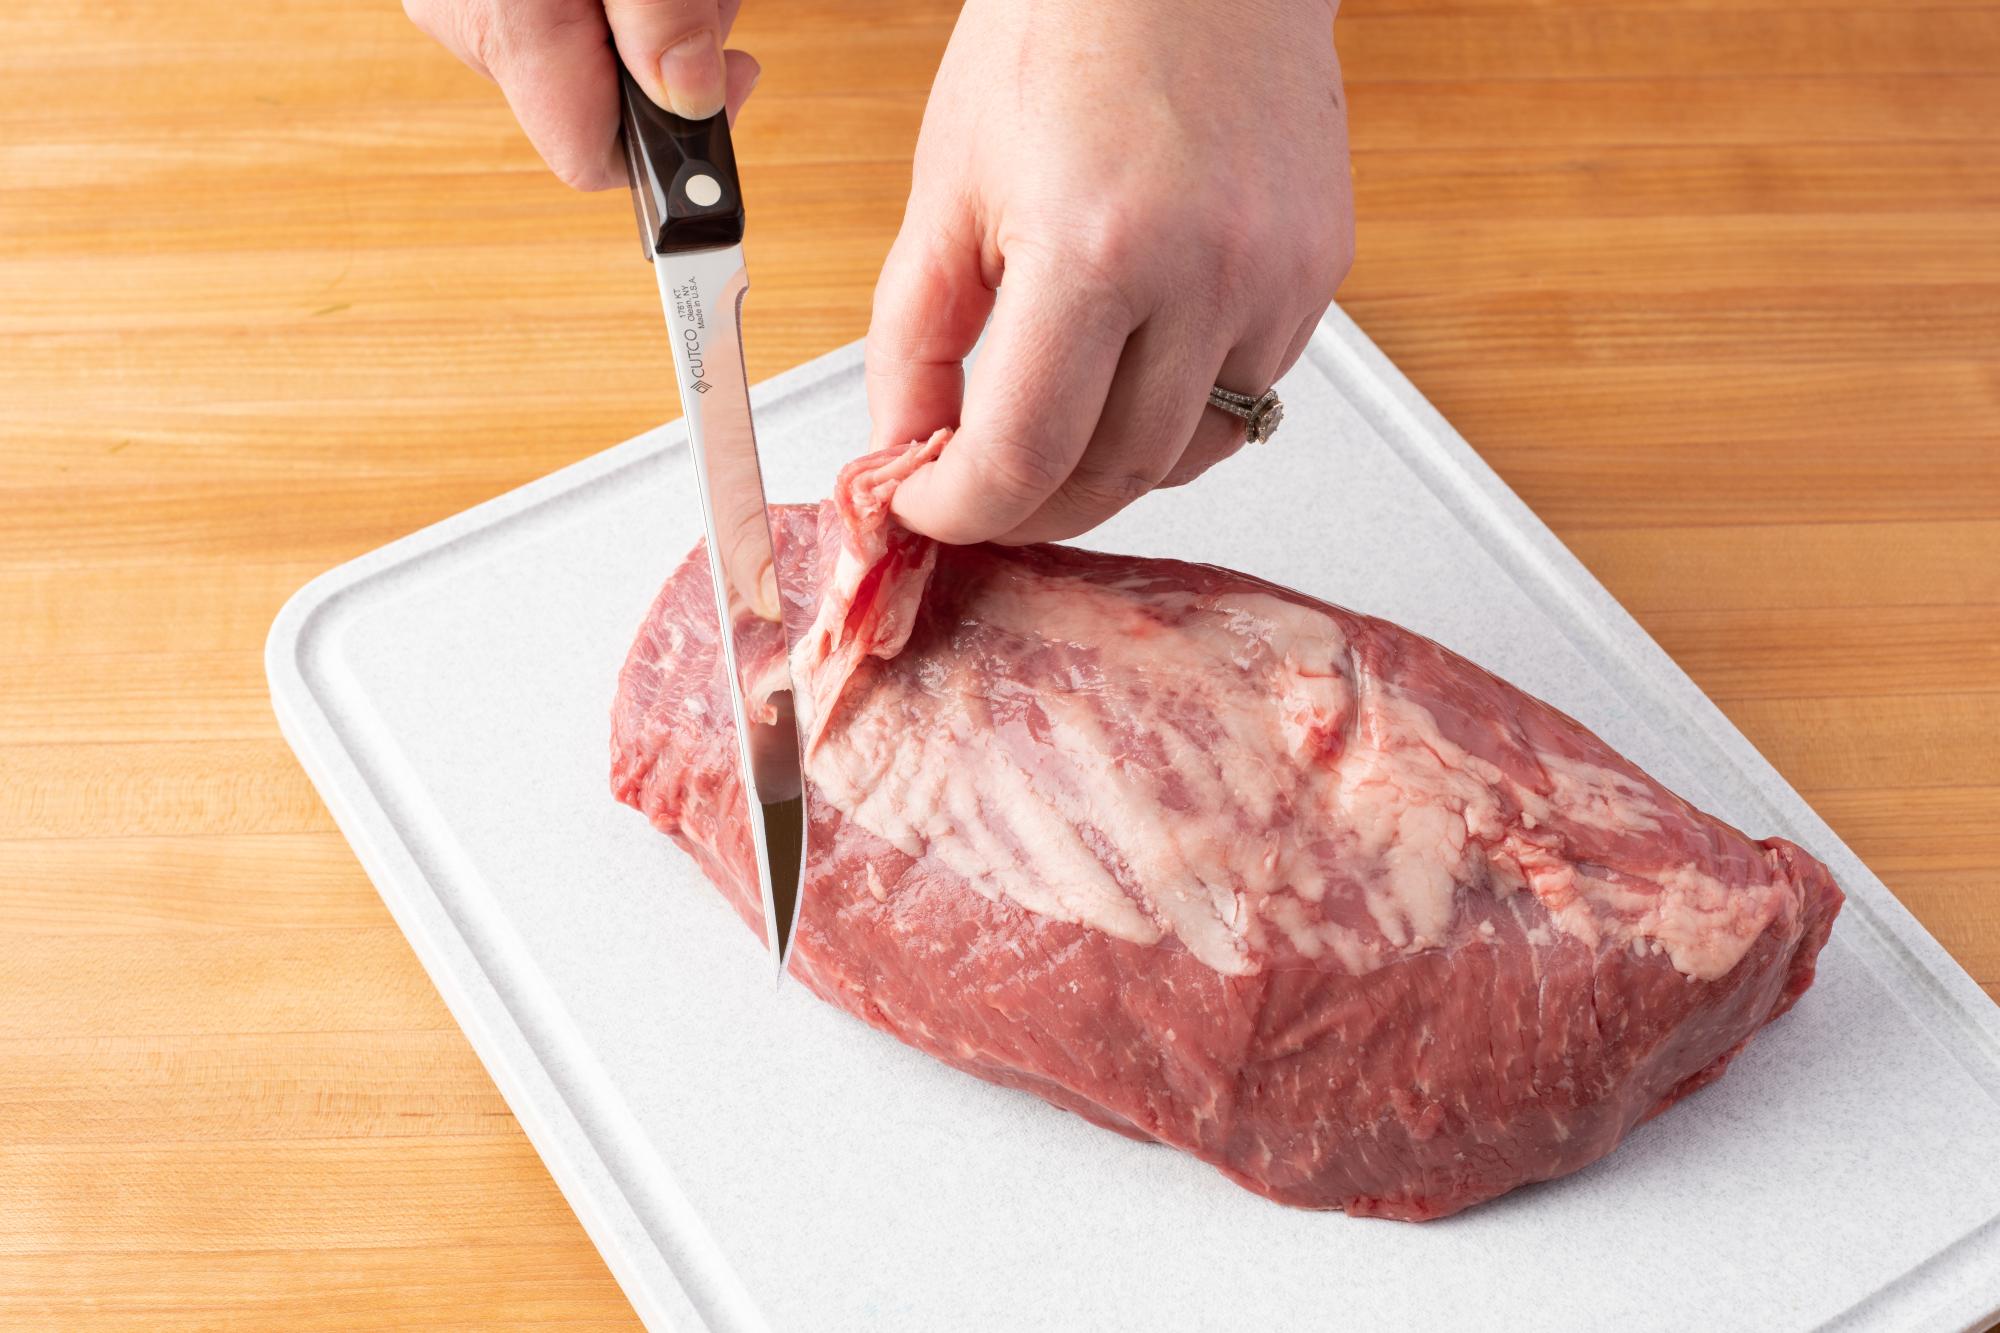 Use a Boning Knife to trim excess fat.